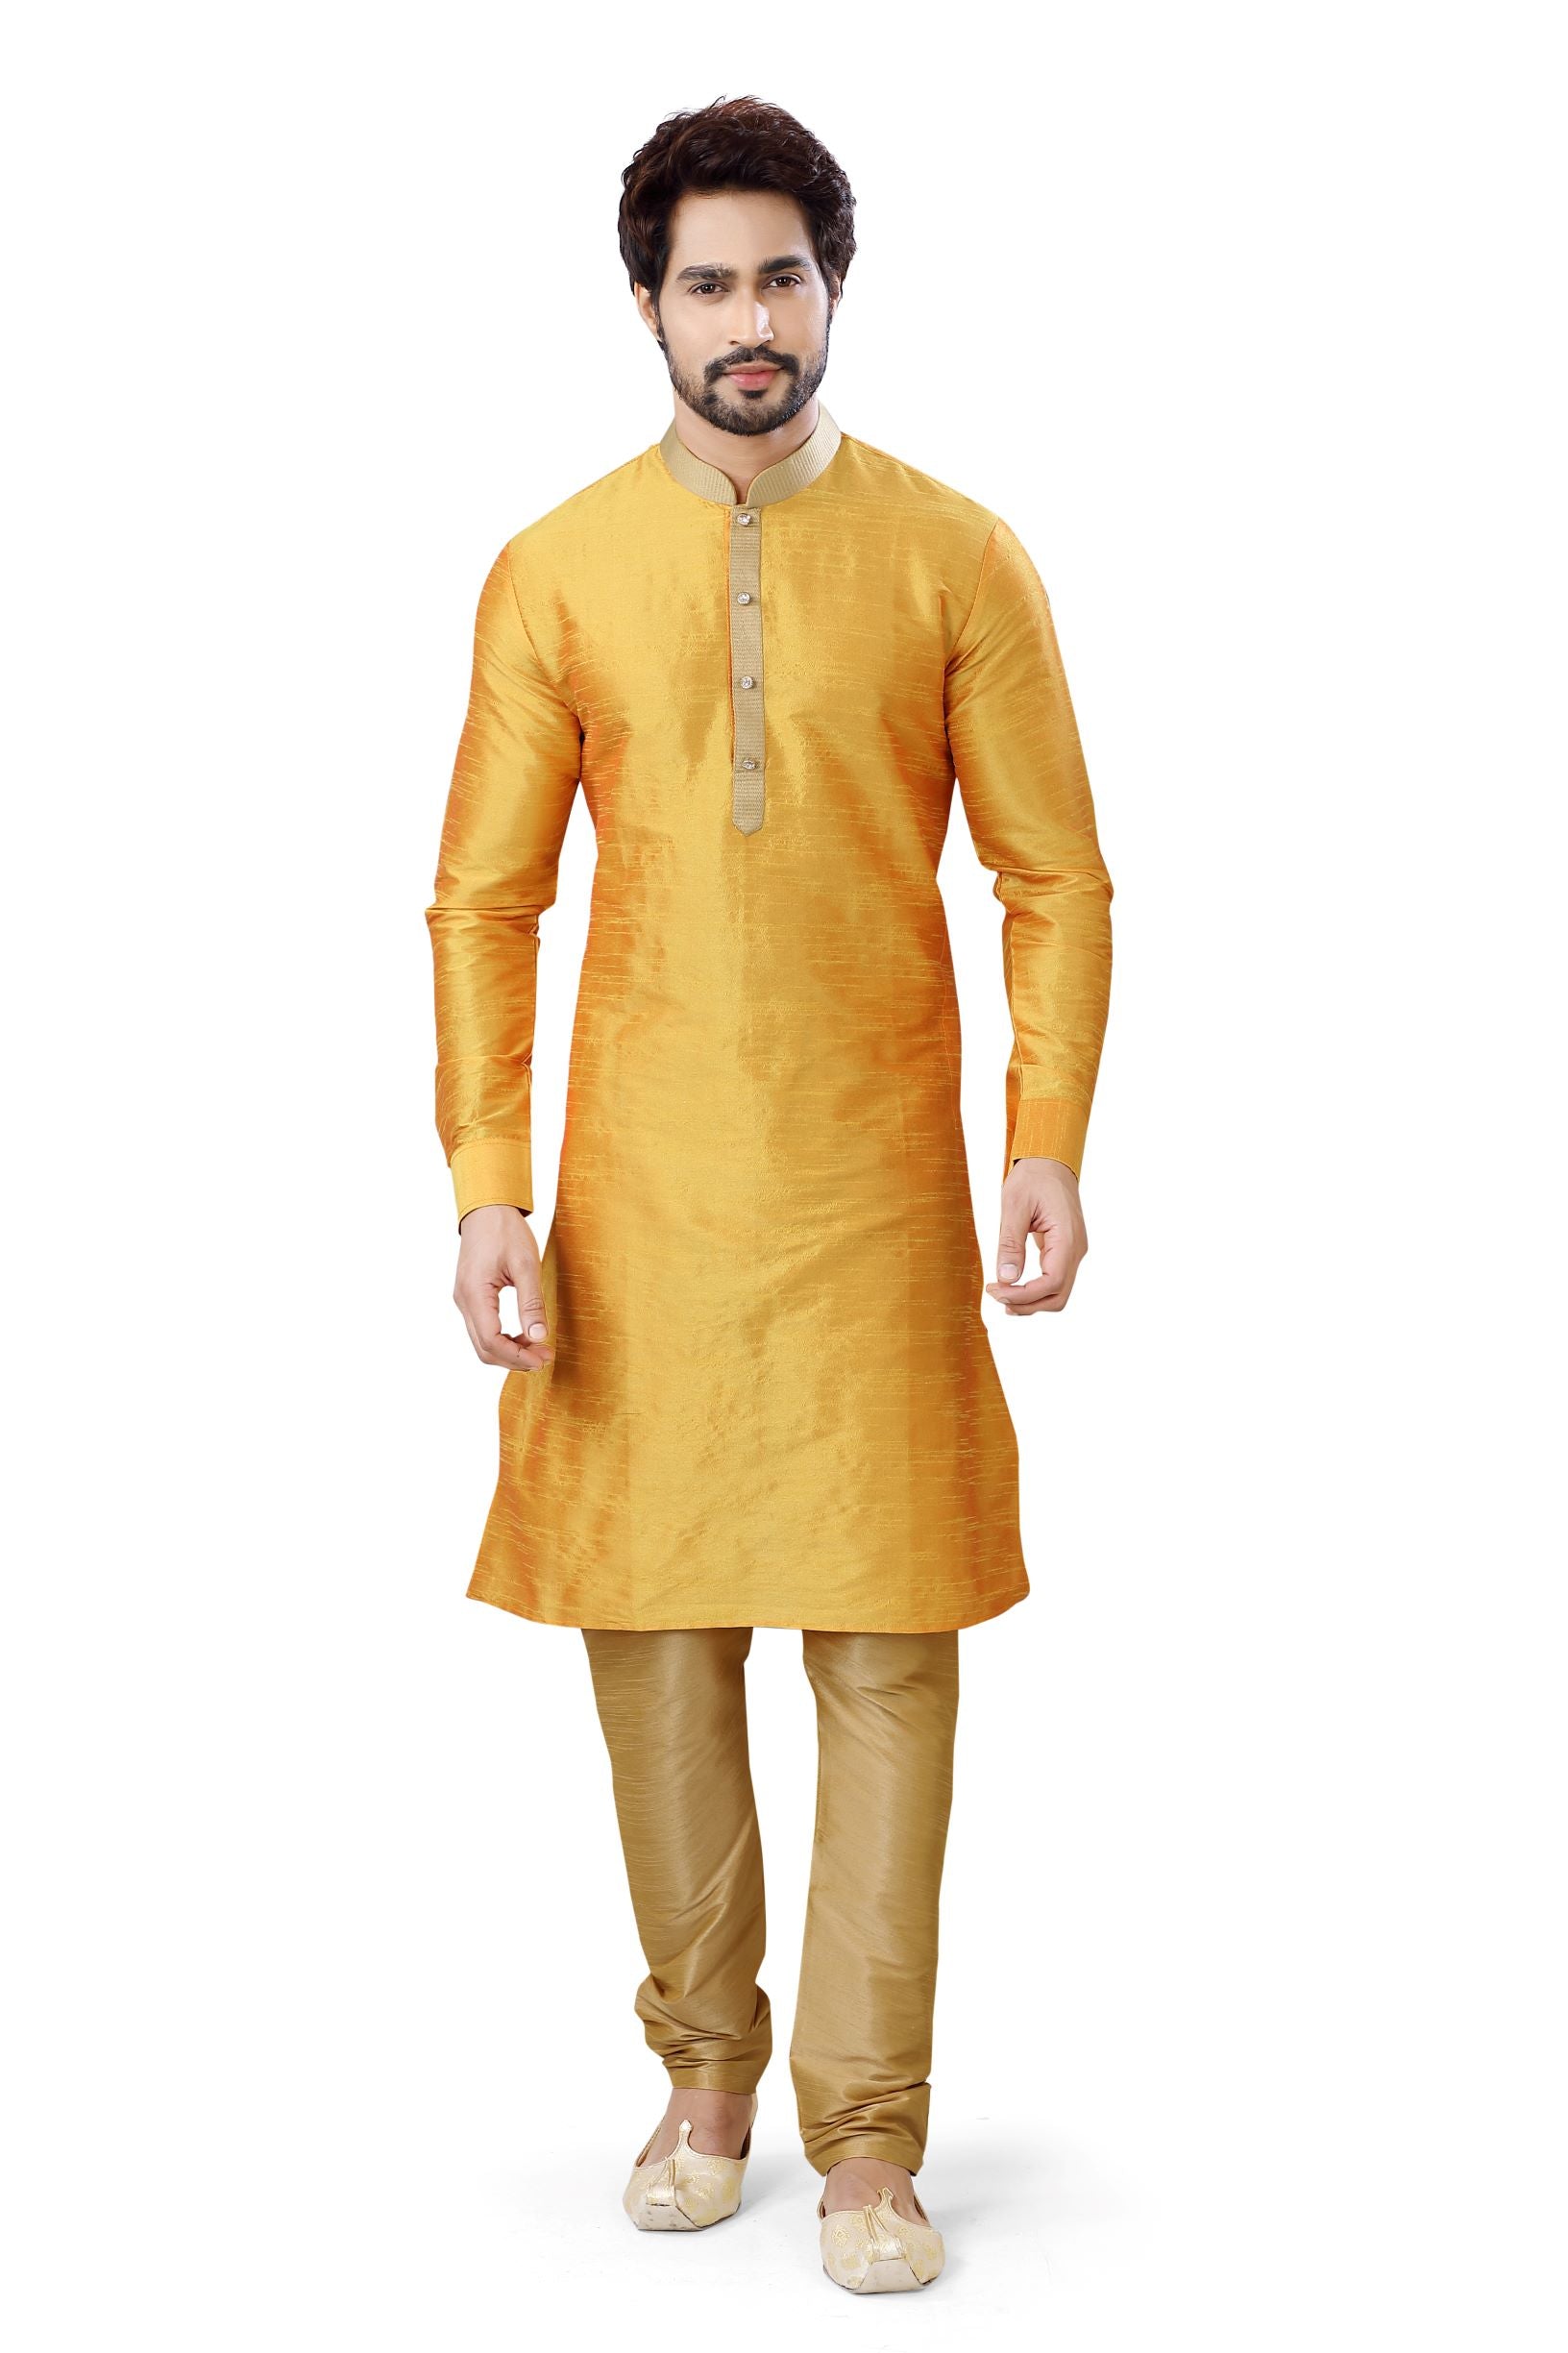 Clearance - Anchor embroidery Kurta Pajama in Musturd color